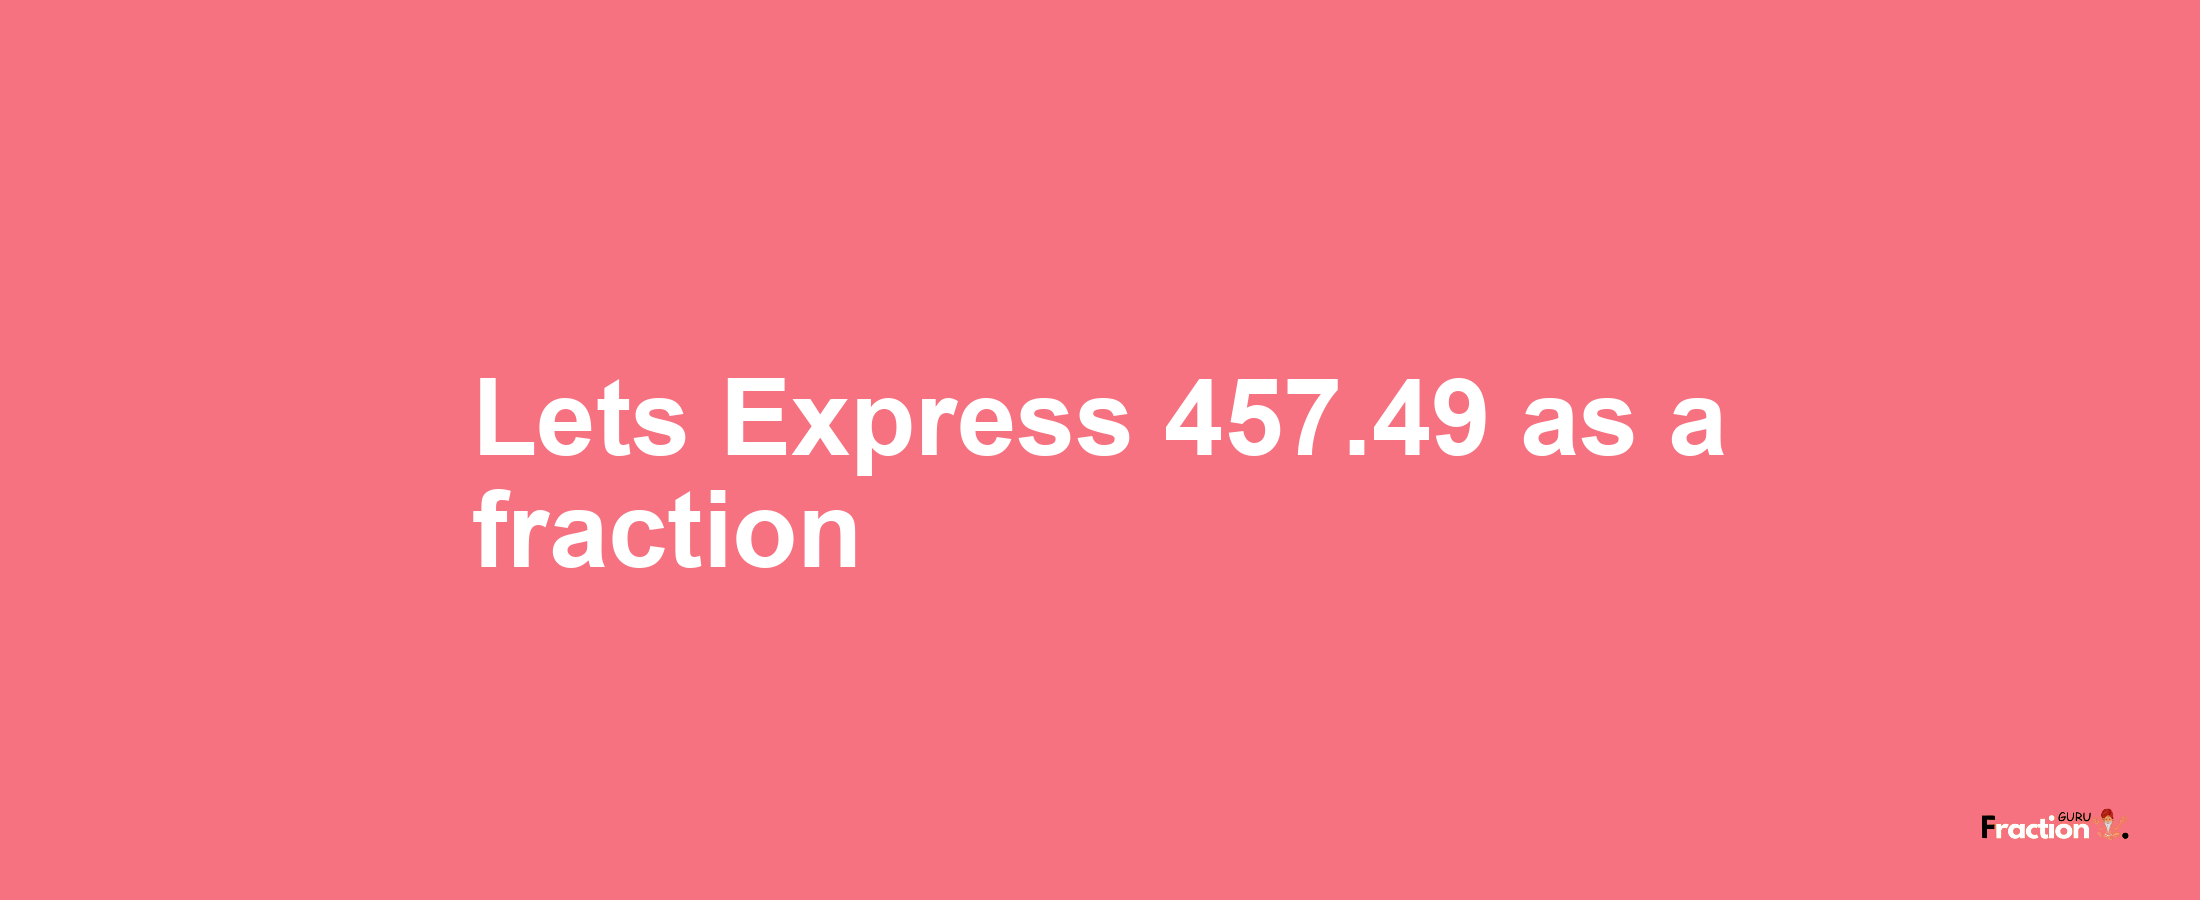 Lets Express 457.49 as afraction